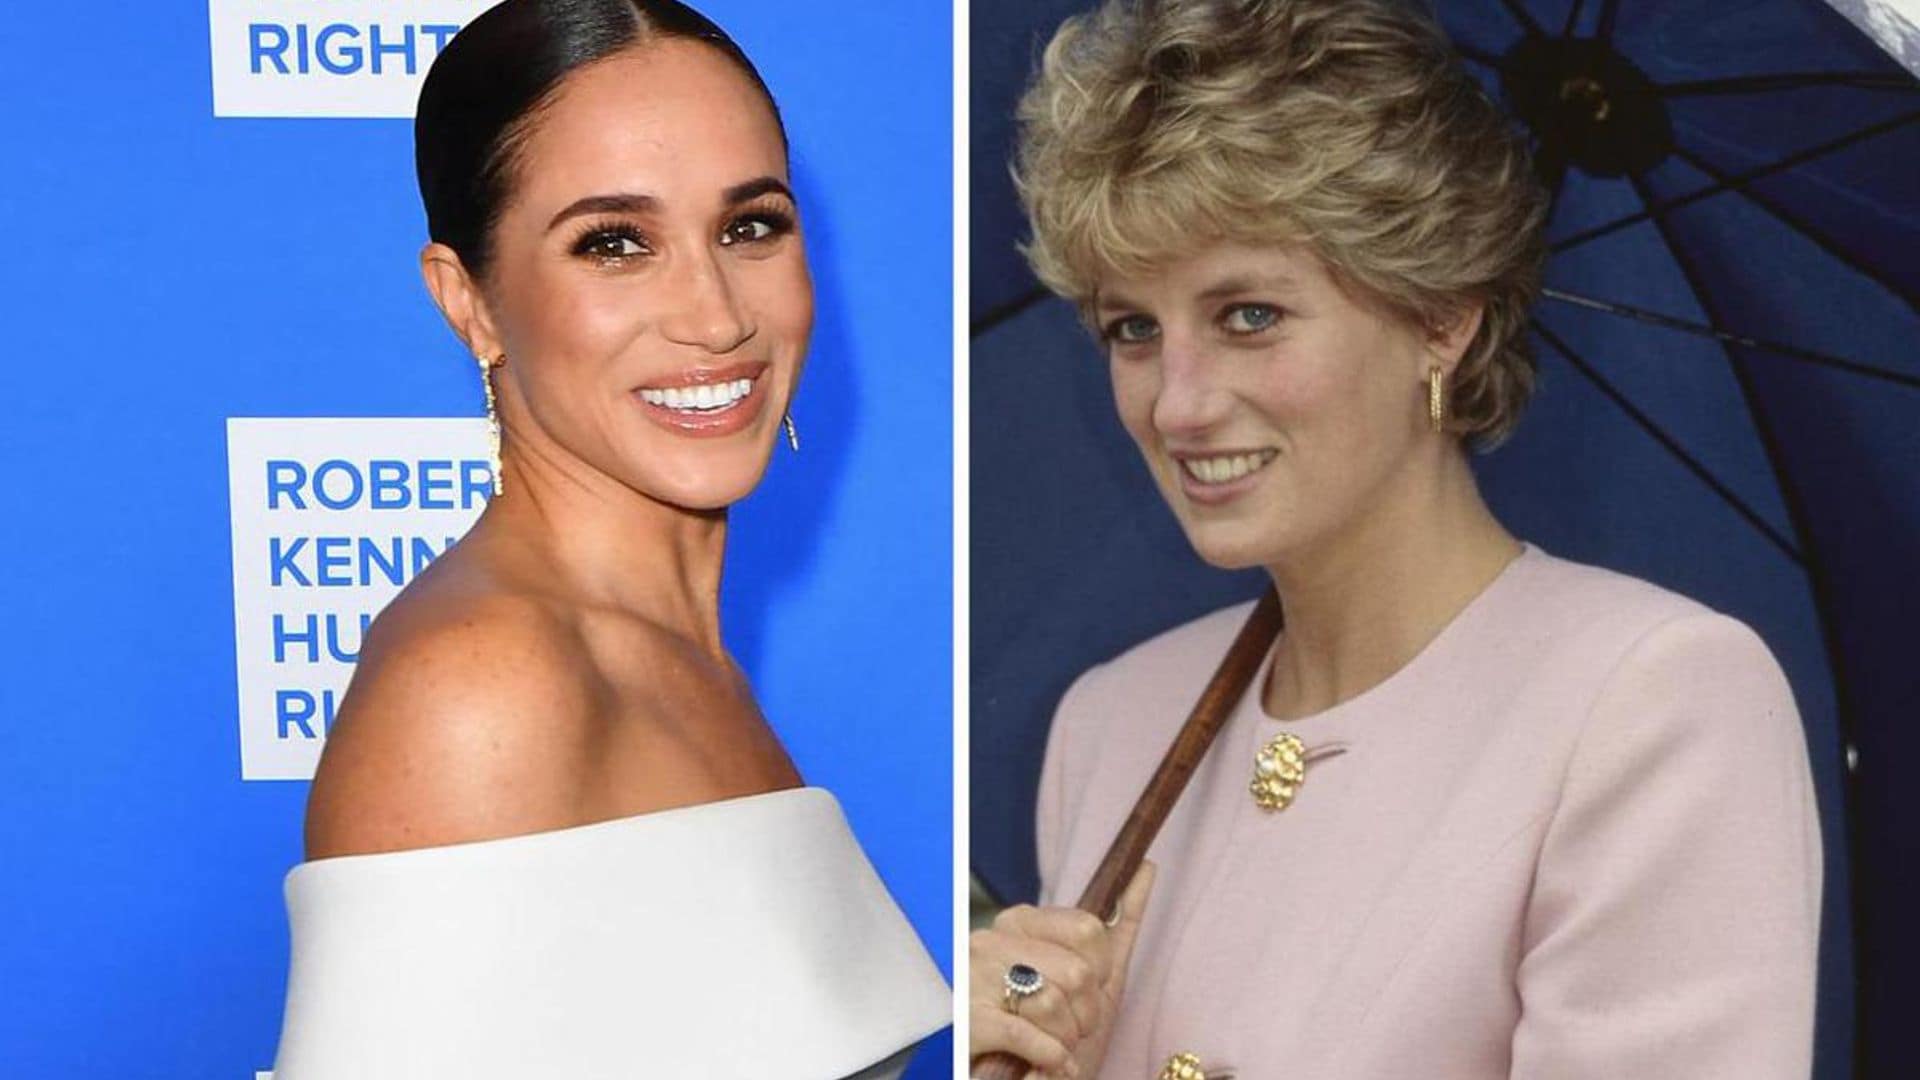 Prince Harry shares the similarities between Meghan Markle and Princess Diana: ‘The same compassion’